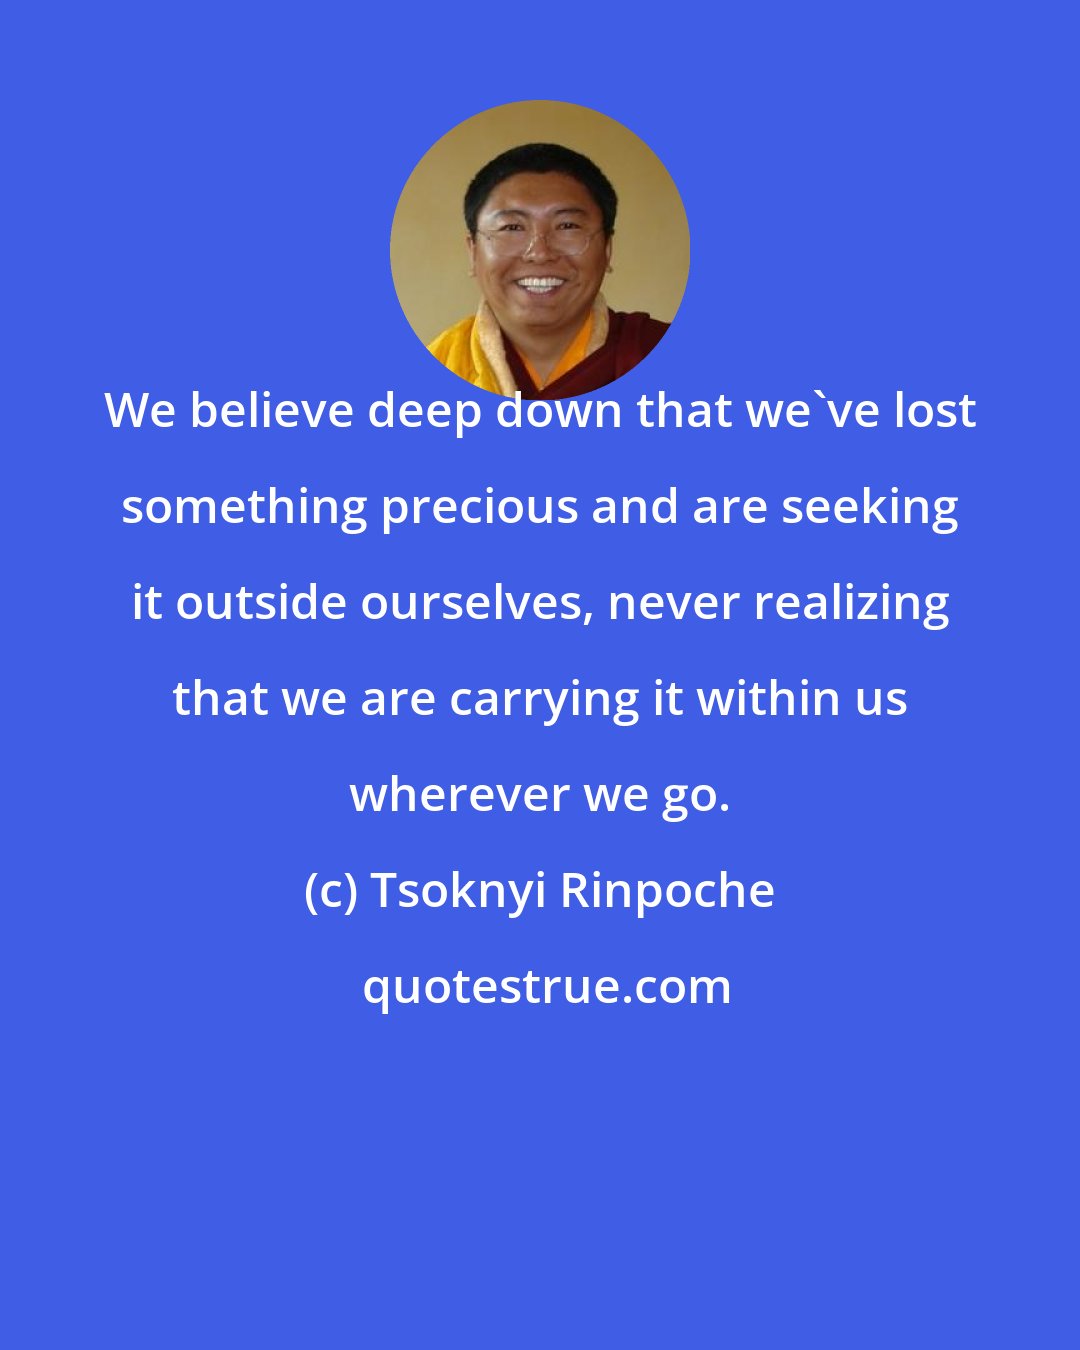 Tsoknyi Rinpoche: We believe deep down that we've lost something precious and are seeking it outside ourselves, never realizing that we are carrying it within us wherever we go.